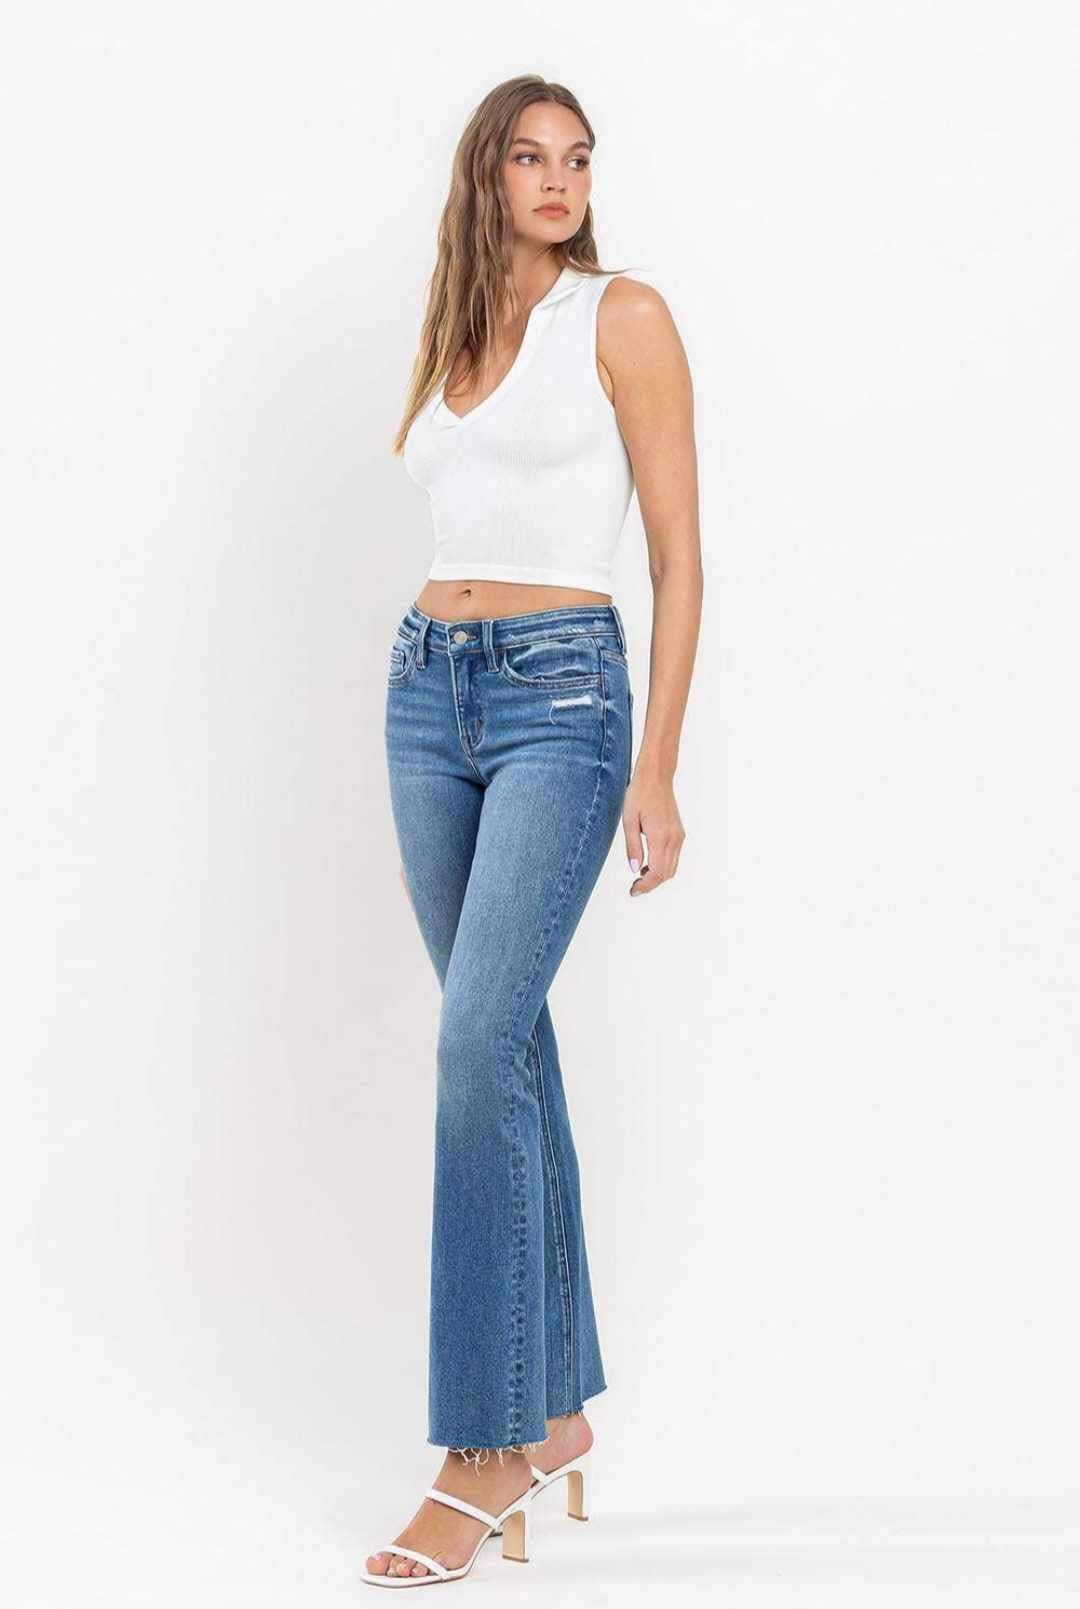 Well Rounded MR Bootcut Vervet Jeans